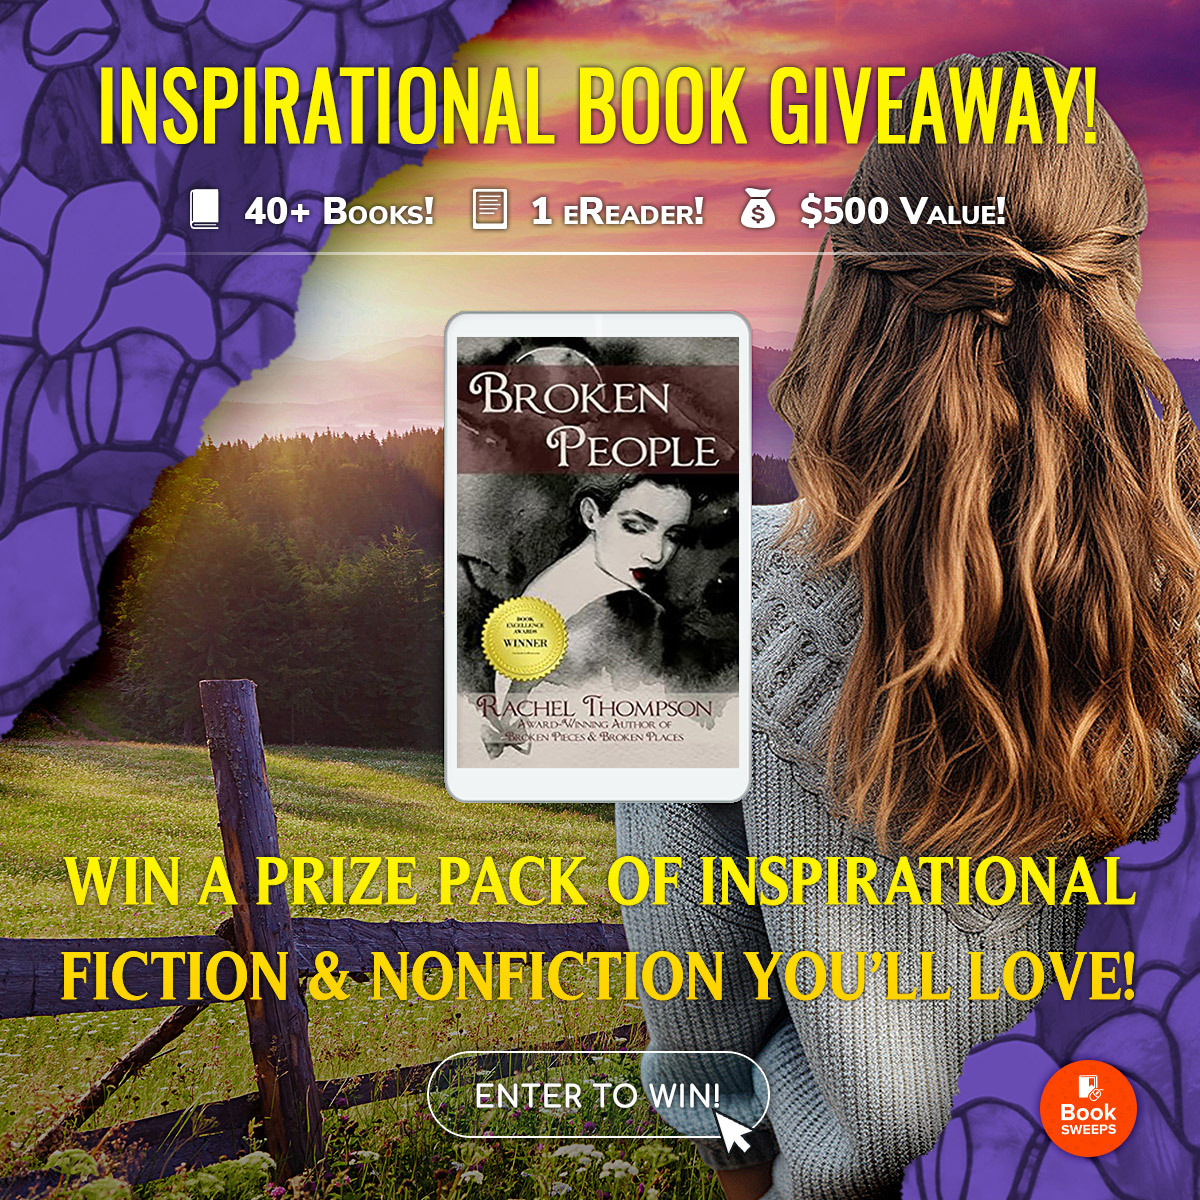 Enter for a chance to win #Inspirational #Fiction and #Nonfiction books from your favorite bestselling and award-winning authors,  including BROKEN PEOPLE  by @RachelintheOC, via @BookSweeps, plus a brand-new Kindle Fire! bit.ly/inspirational-…

#AmReading #MustRead #Books